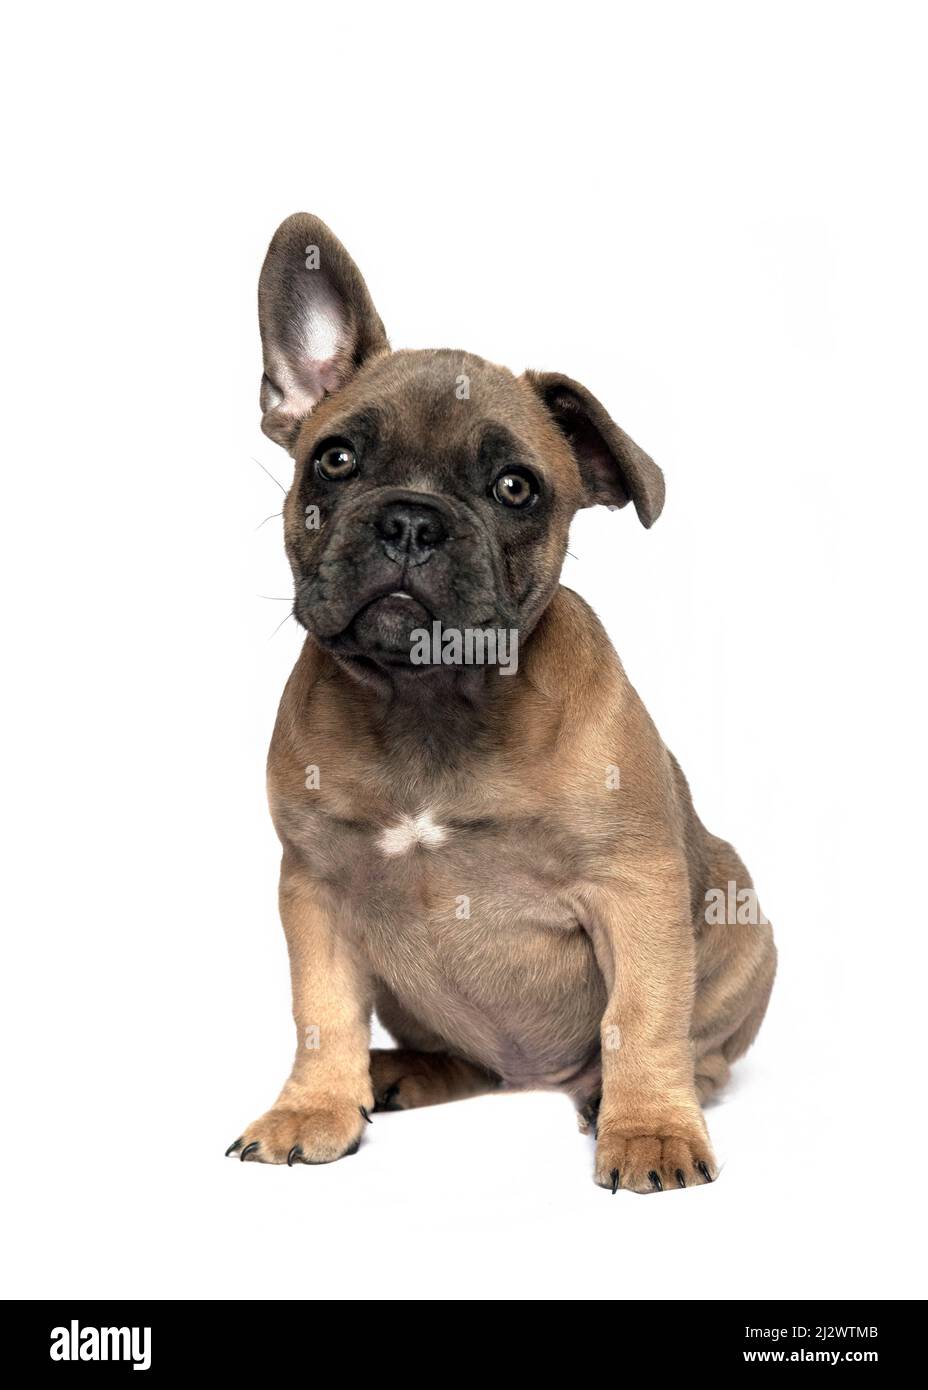 Beautiful cute french bulldog puppy sat with one ear up looking above the camera, isolated on a white background Stock Photo